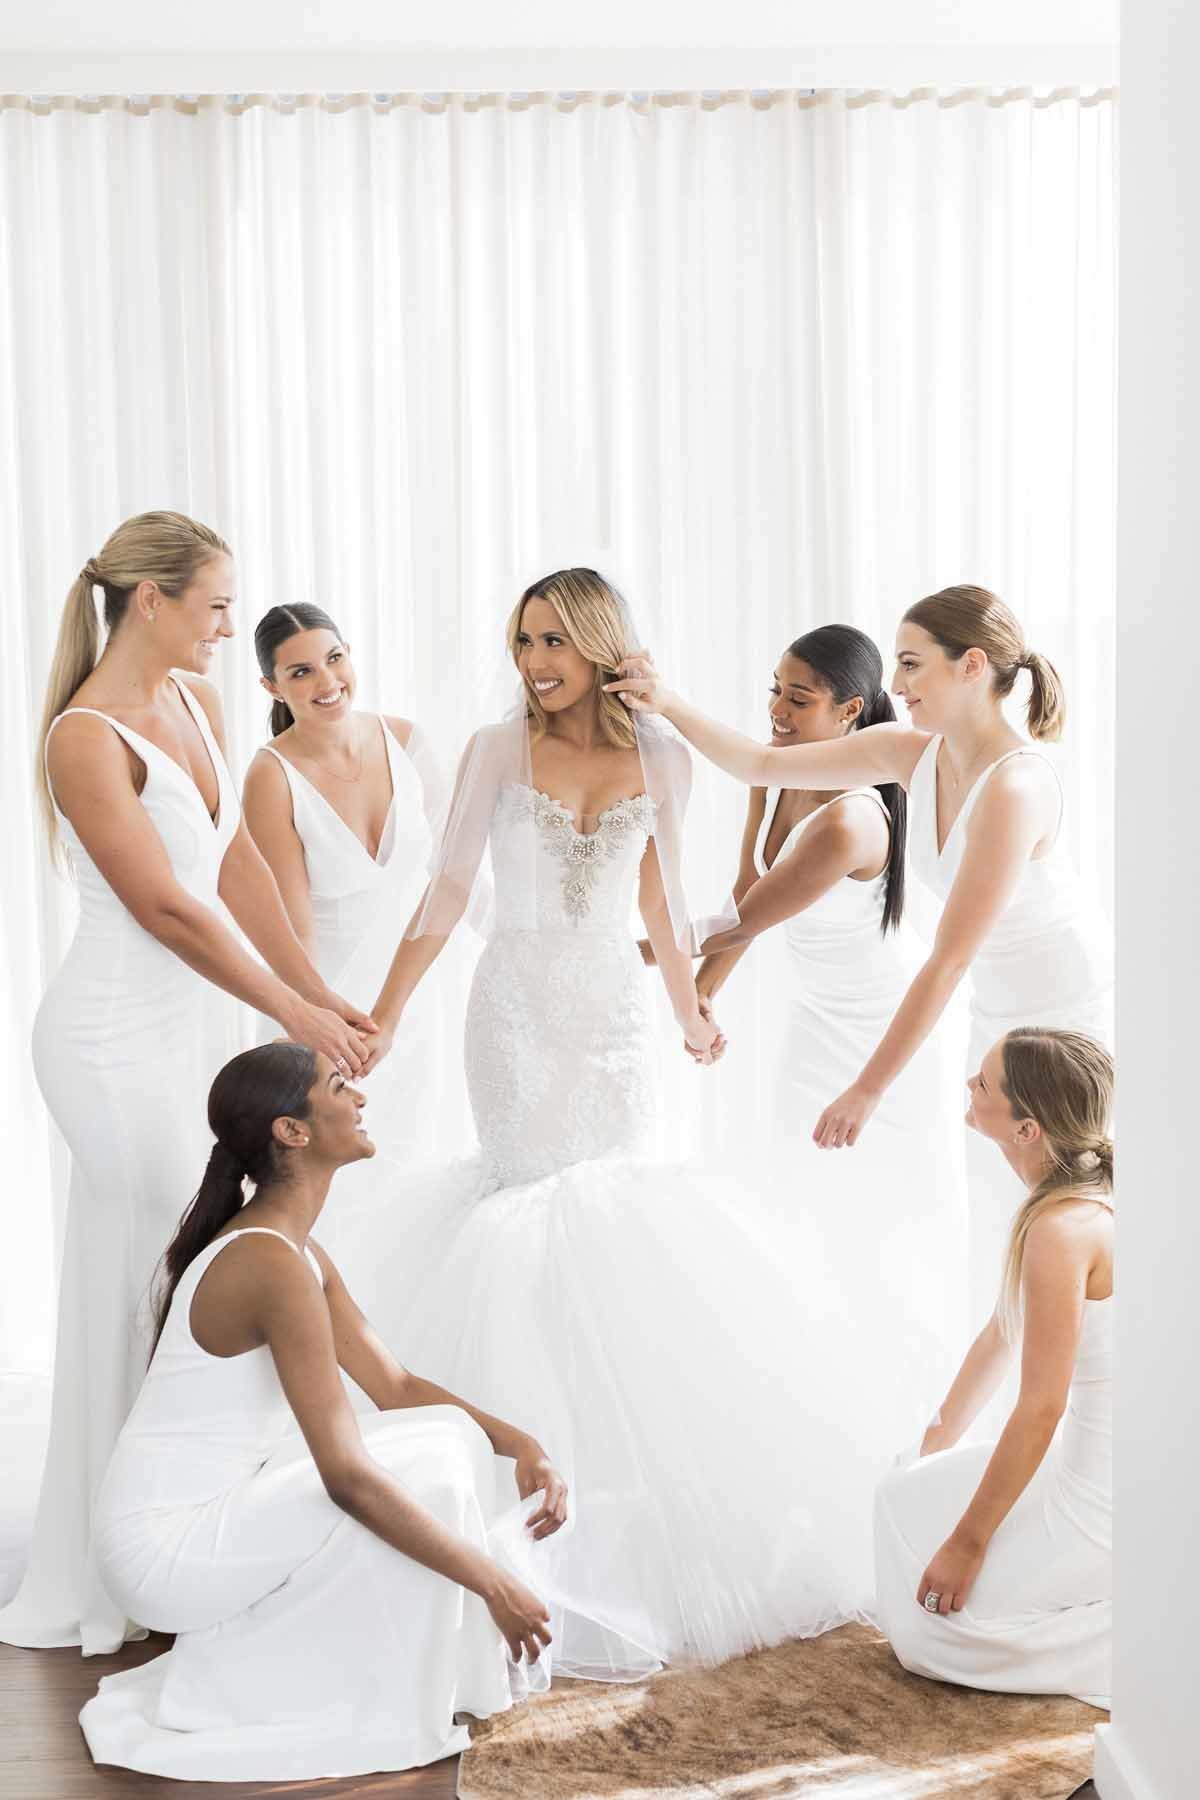 A beautiful and happy bride surrounded by her maids